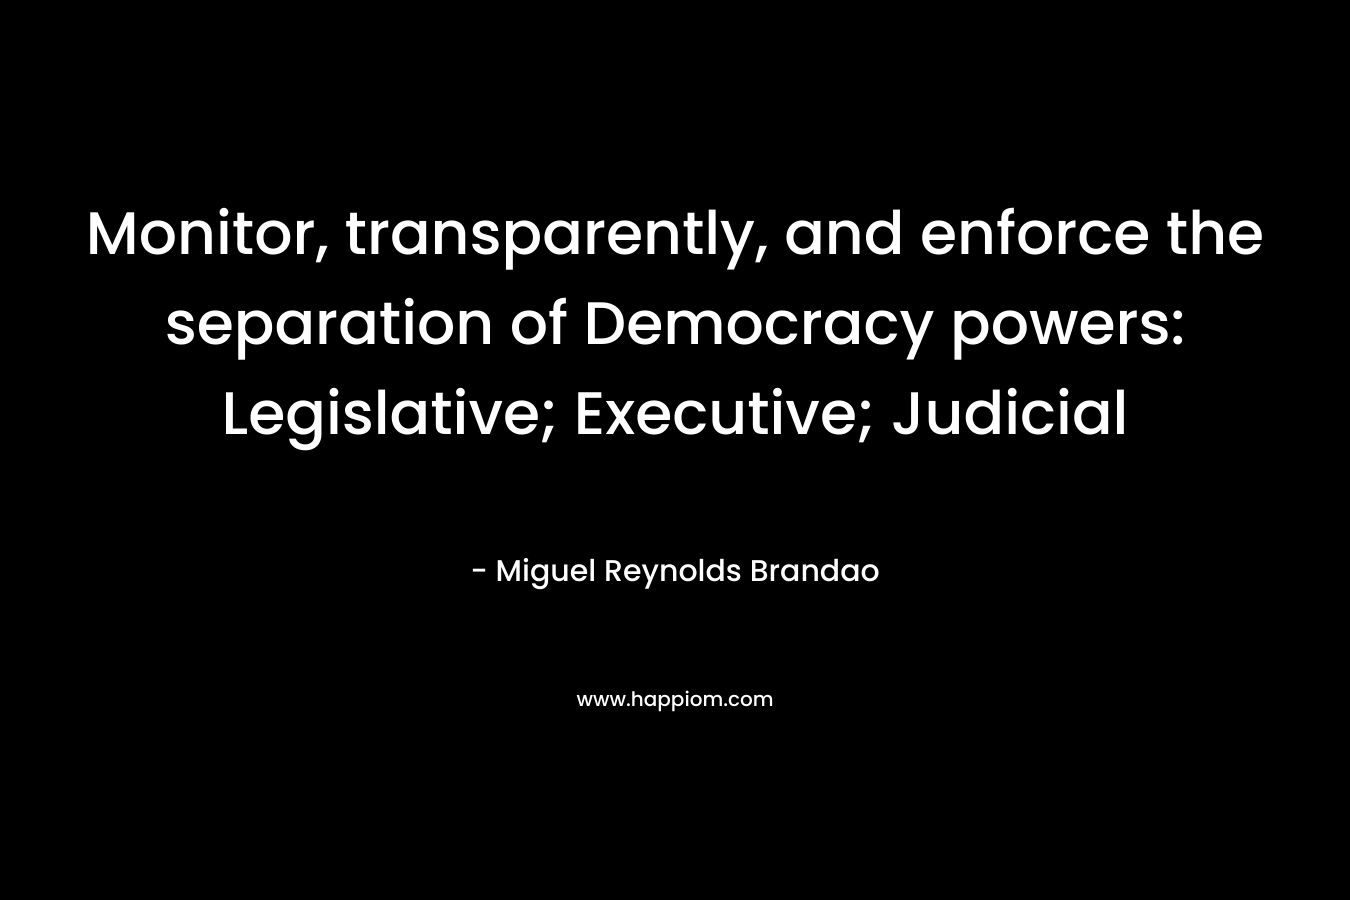 Monitor, transparently, and enforce the separation of Democracy powers: Legislative; Executive; Judicial